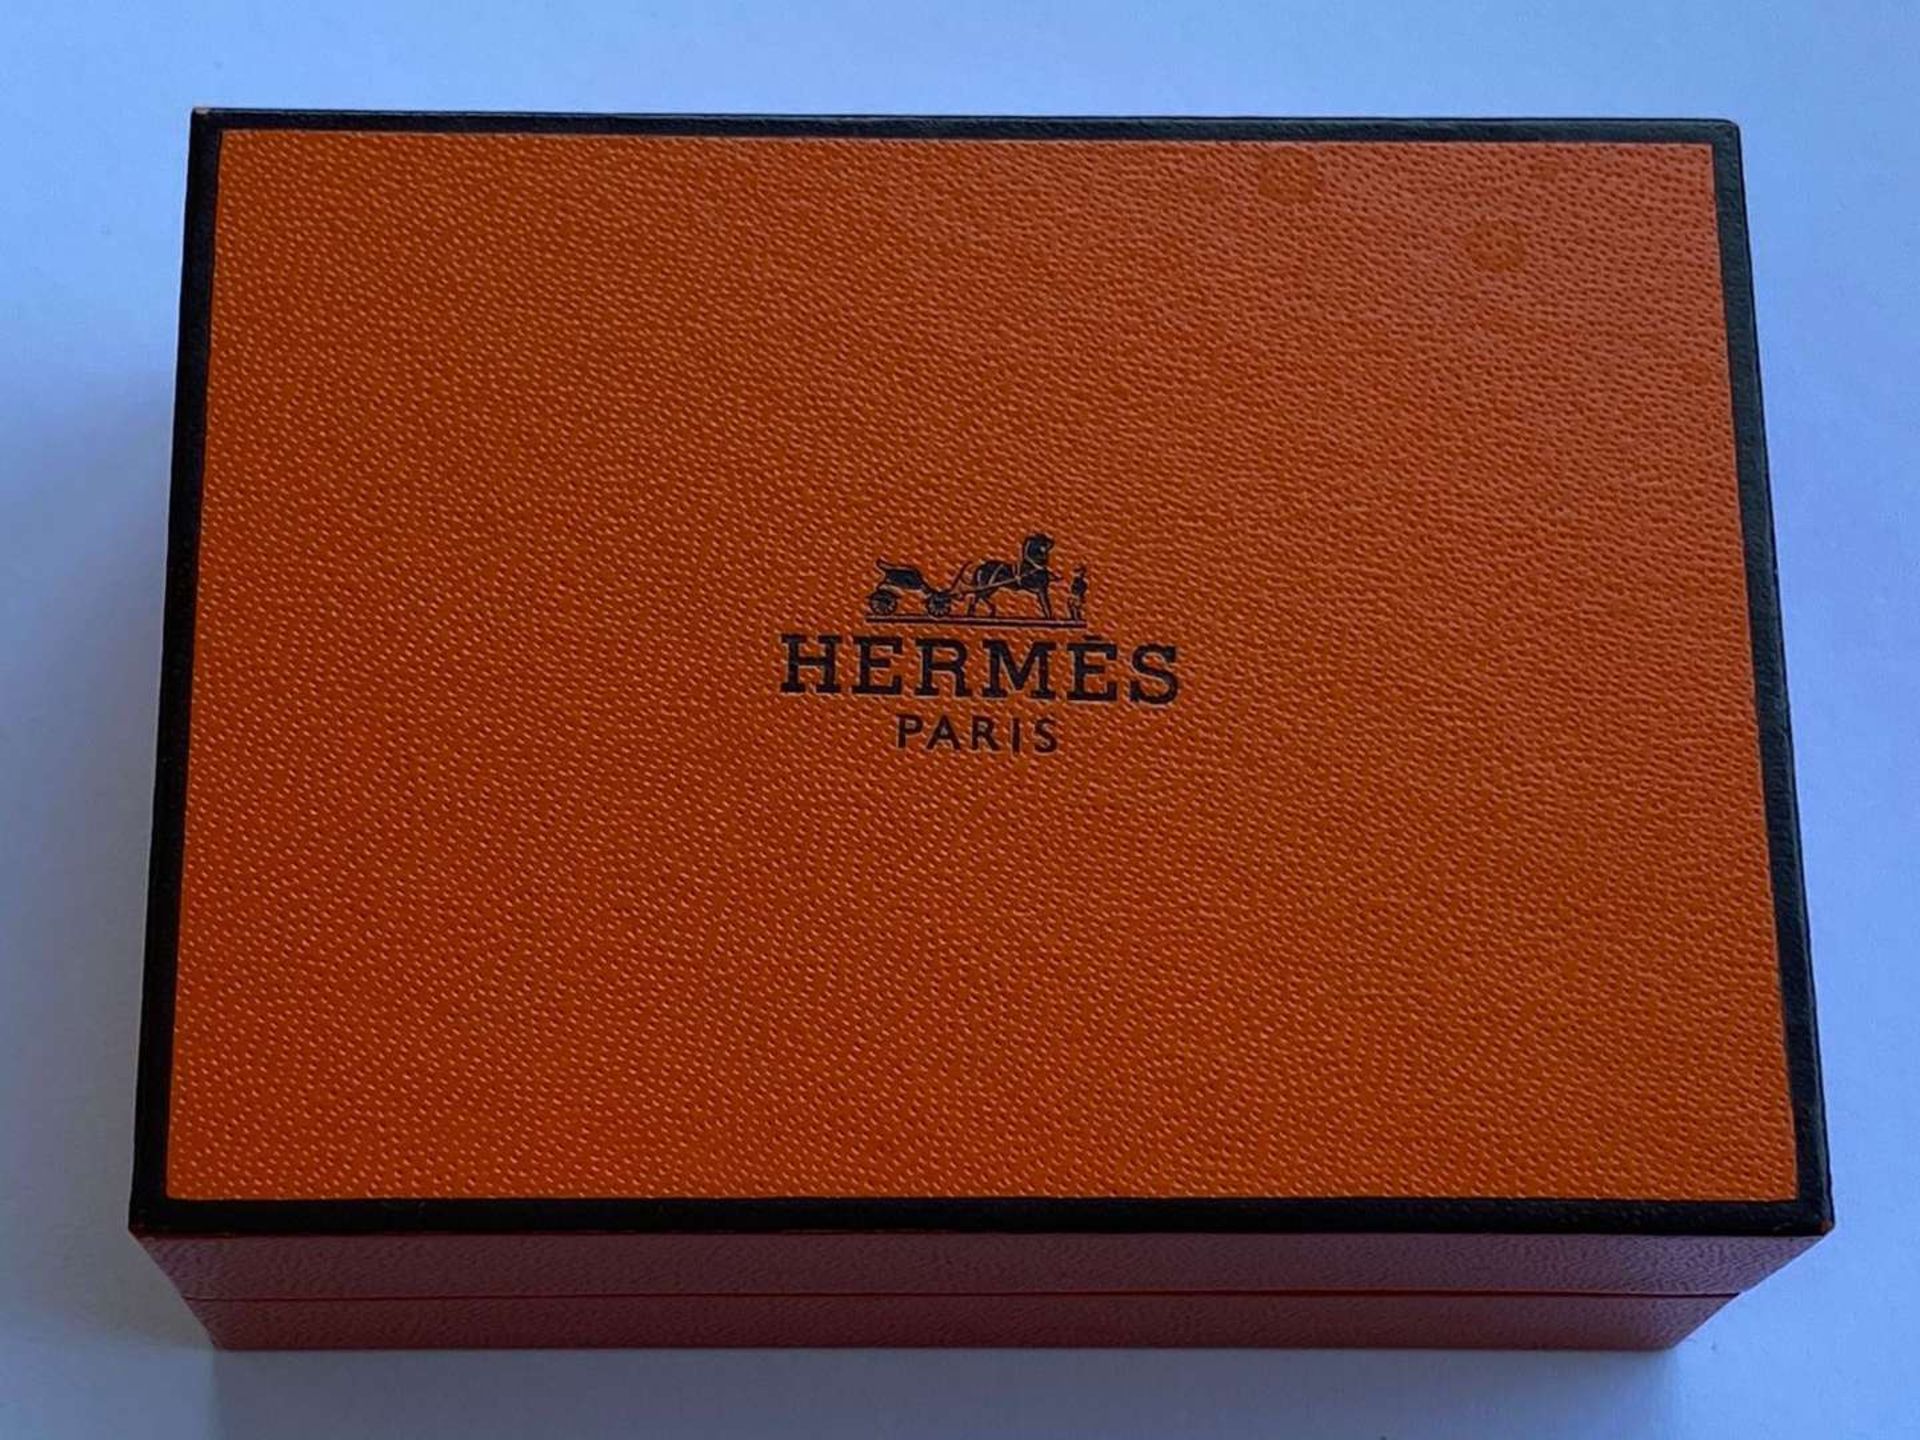 HERMES, a boxed pair of silver “Anchor Chain” cufflinks, designed by Gaetan de Percin - Image 5 of 5